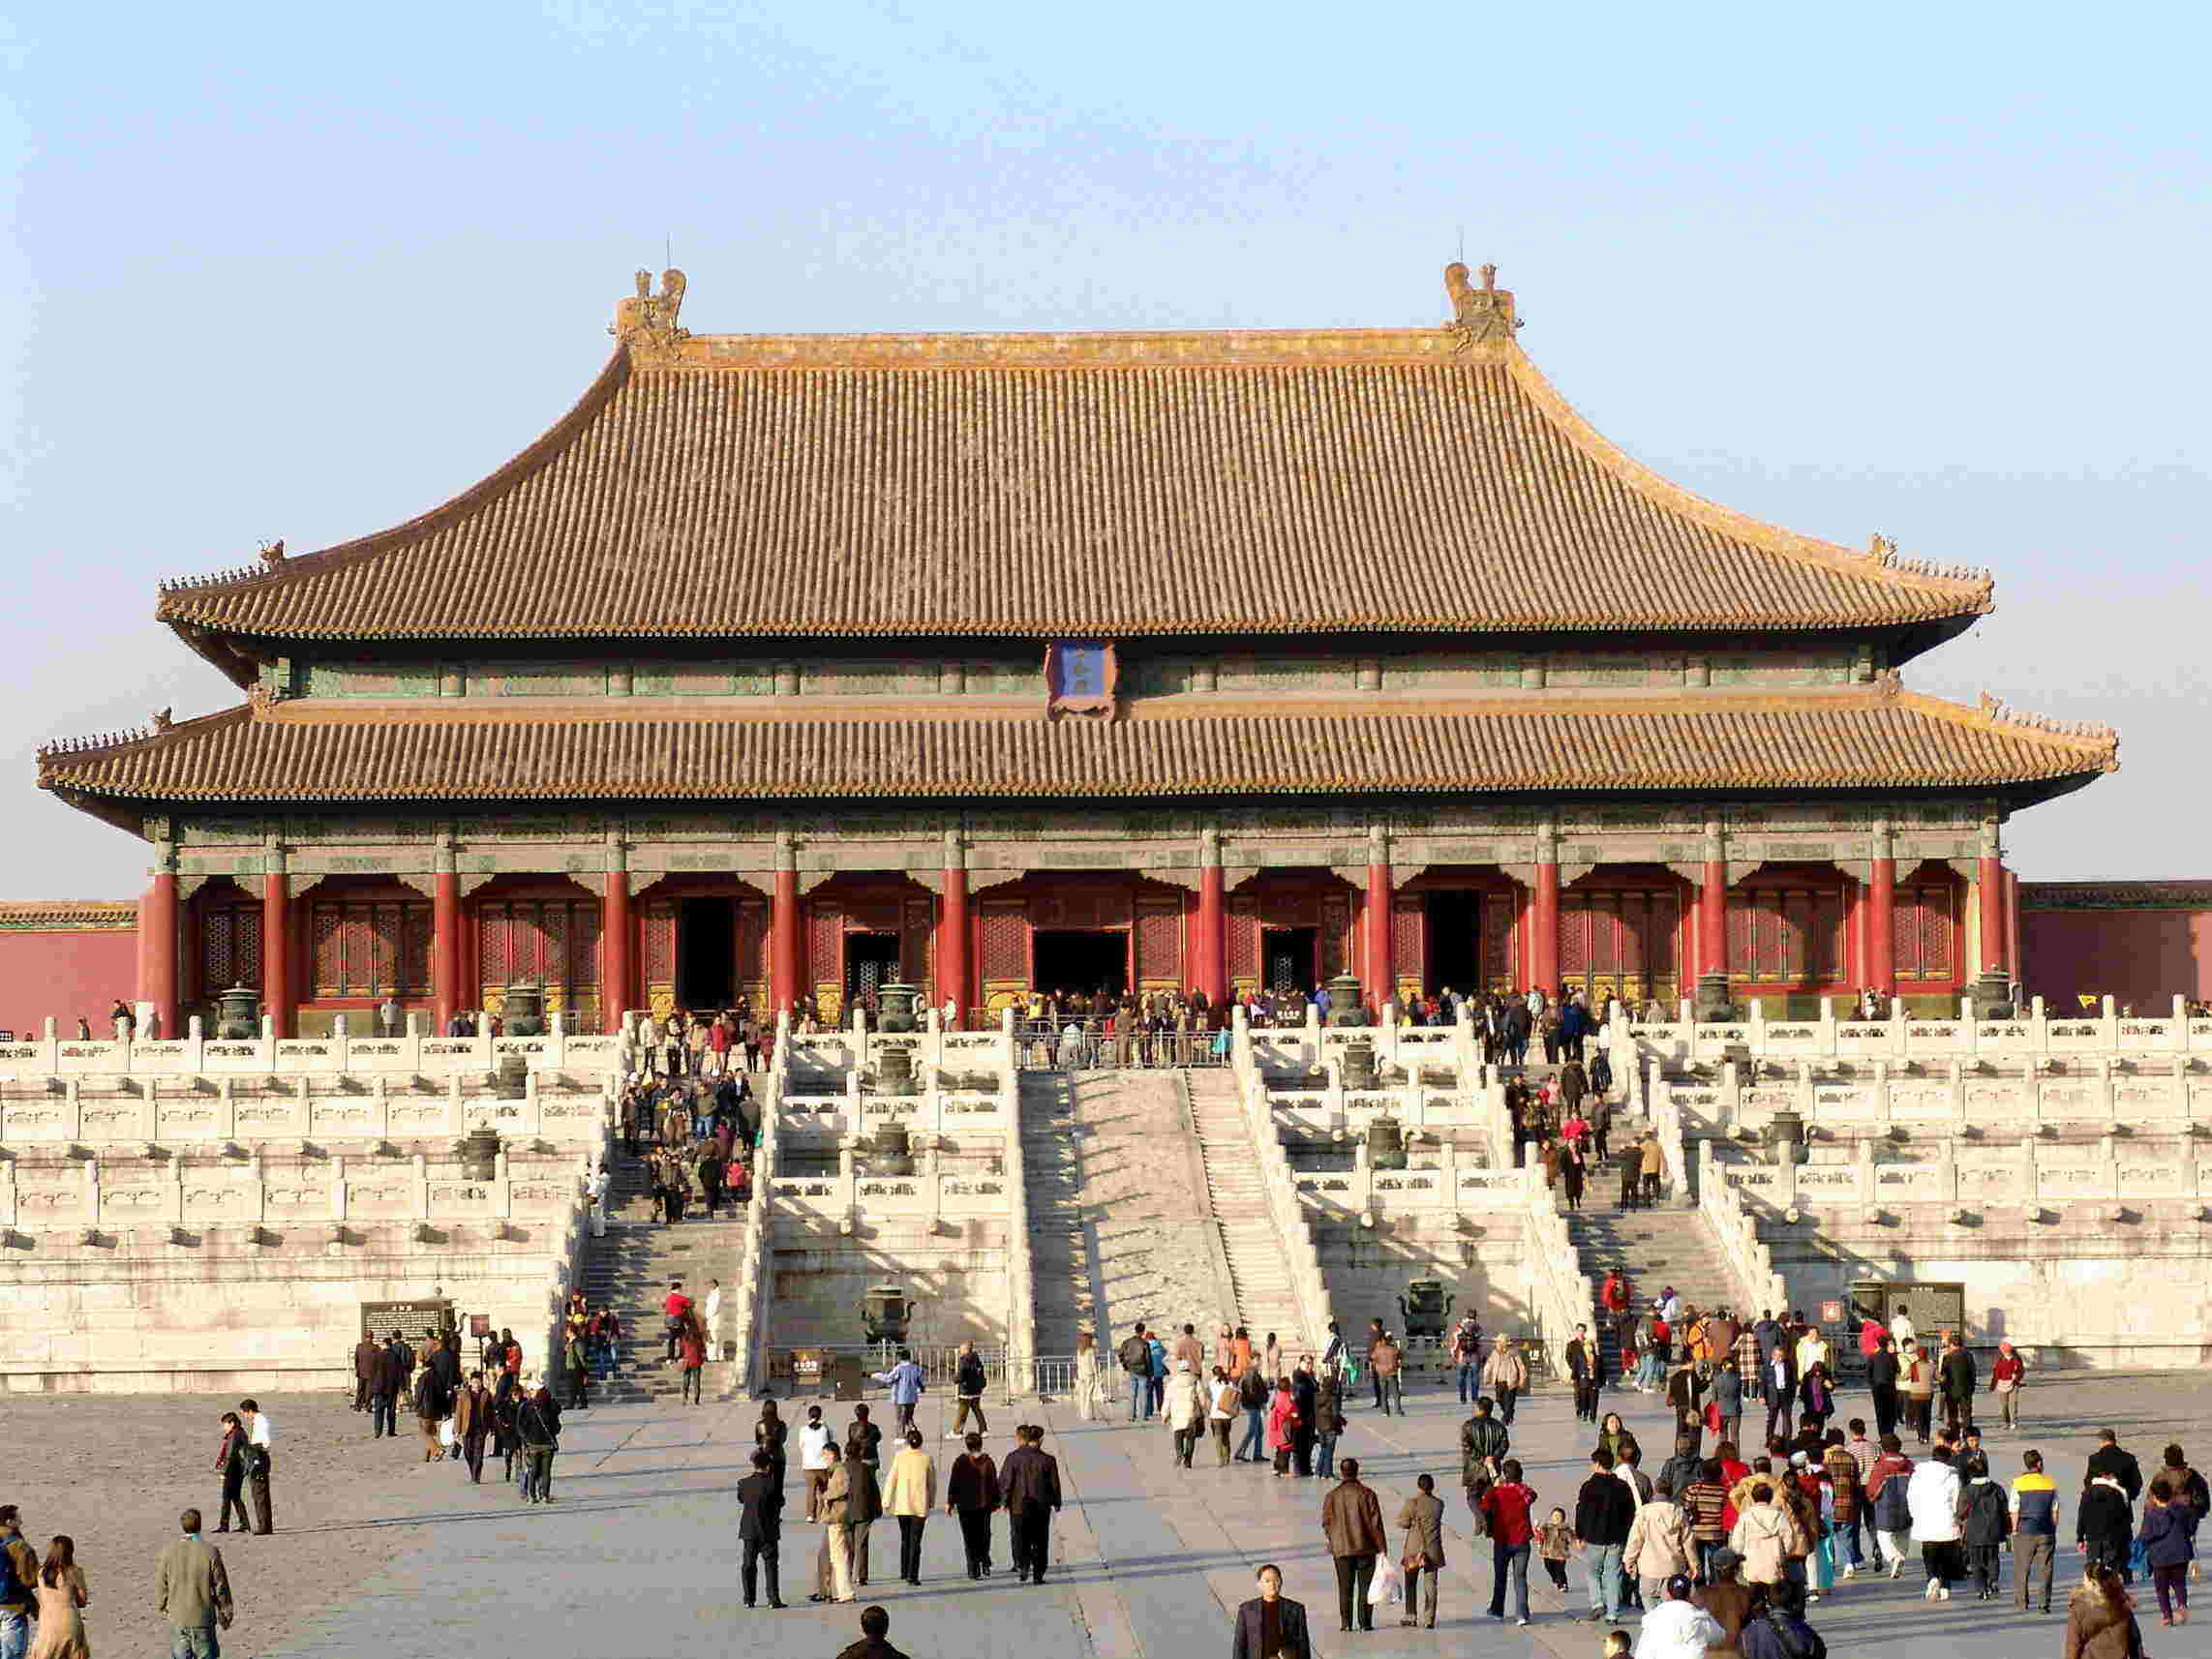 Beijing Tourism Bureau Quotes Some Crazy Numbers on 2015 Visitors